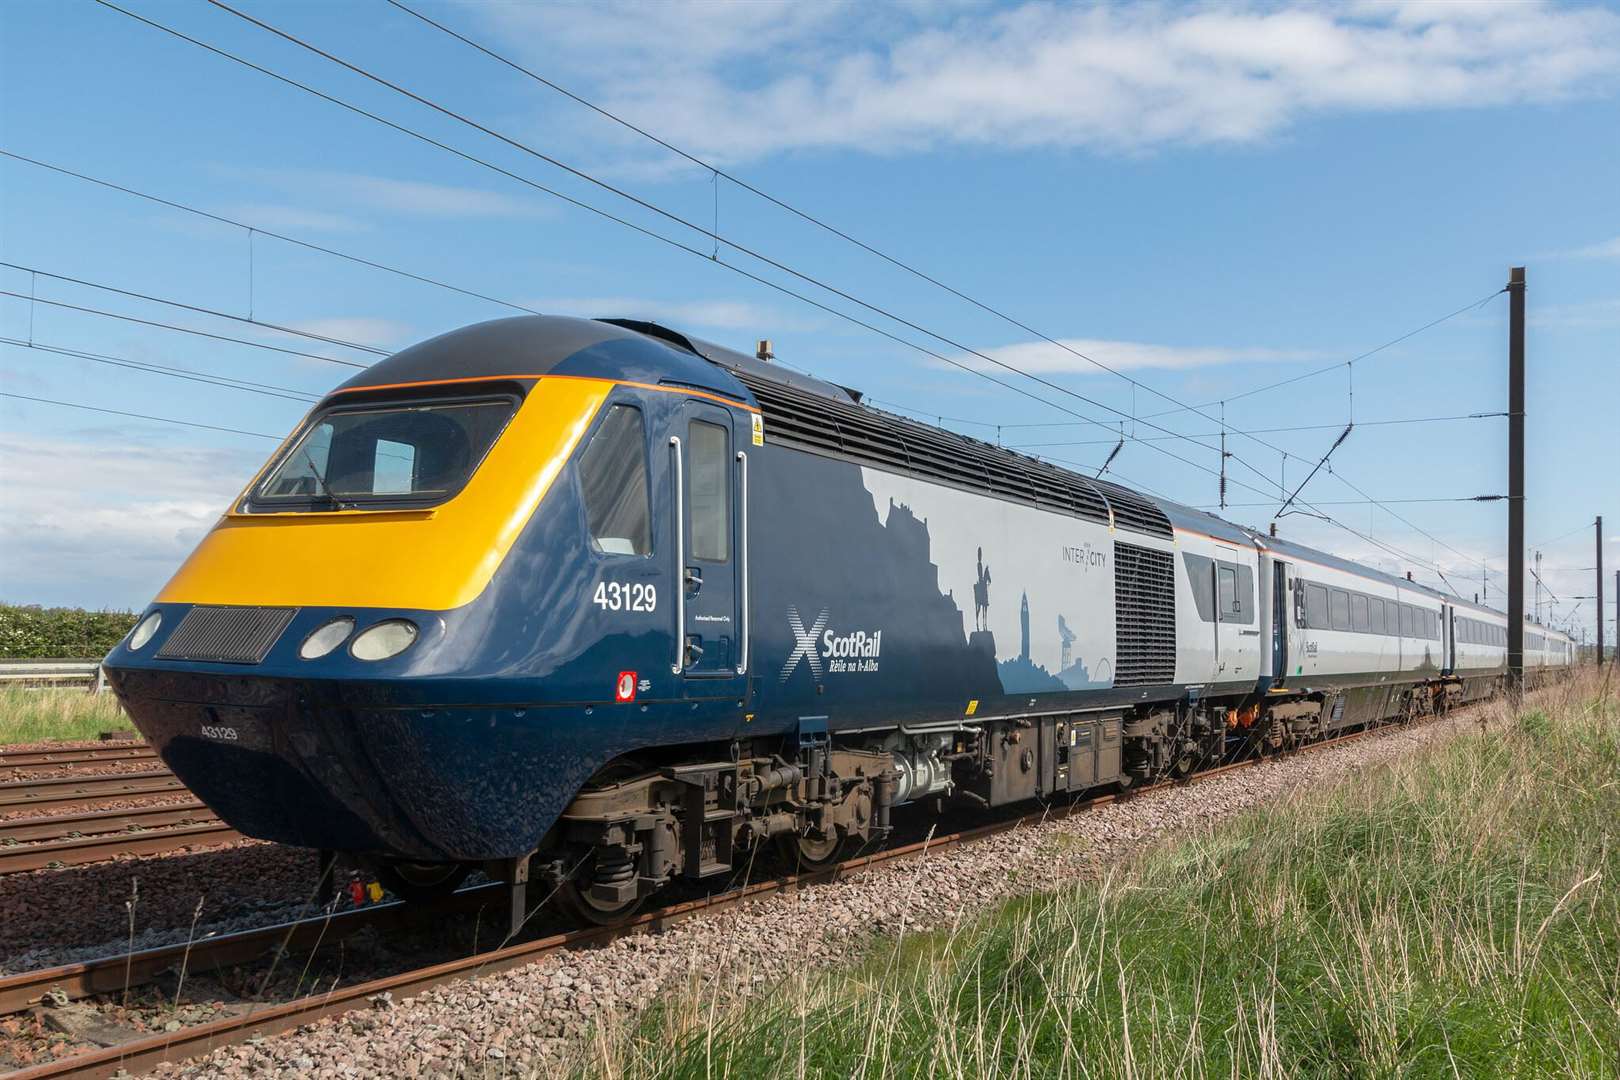 One of the refurbished InterCity 125s that ScotRail has taken delivery of.